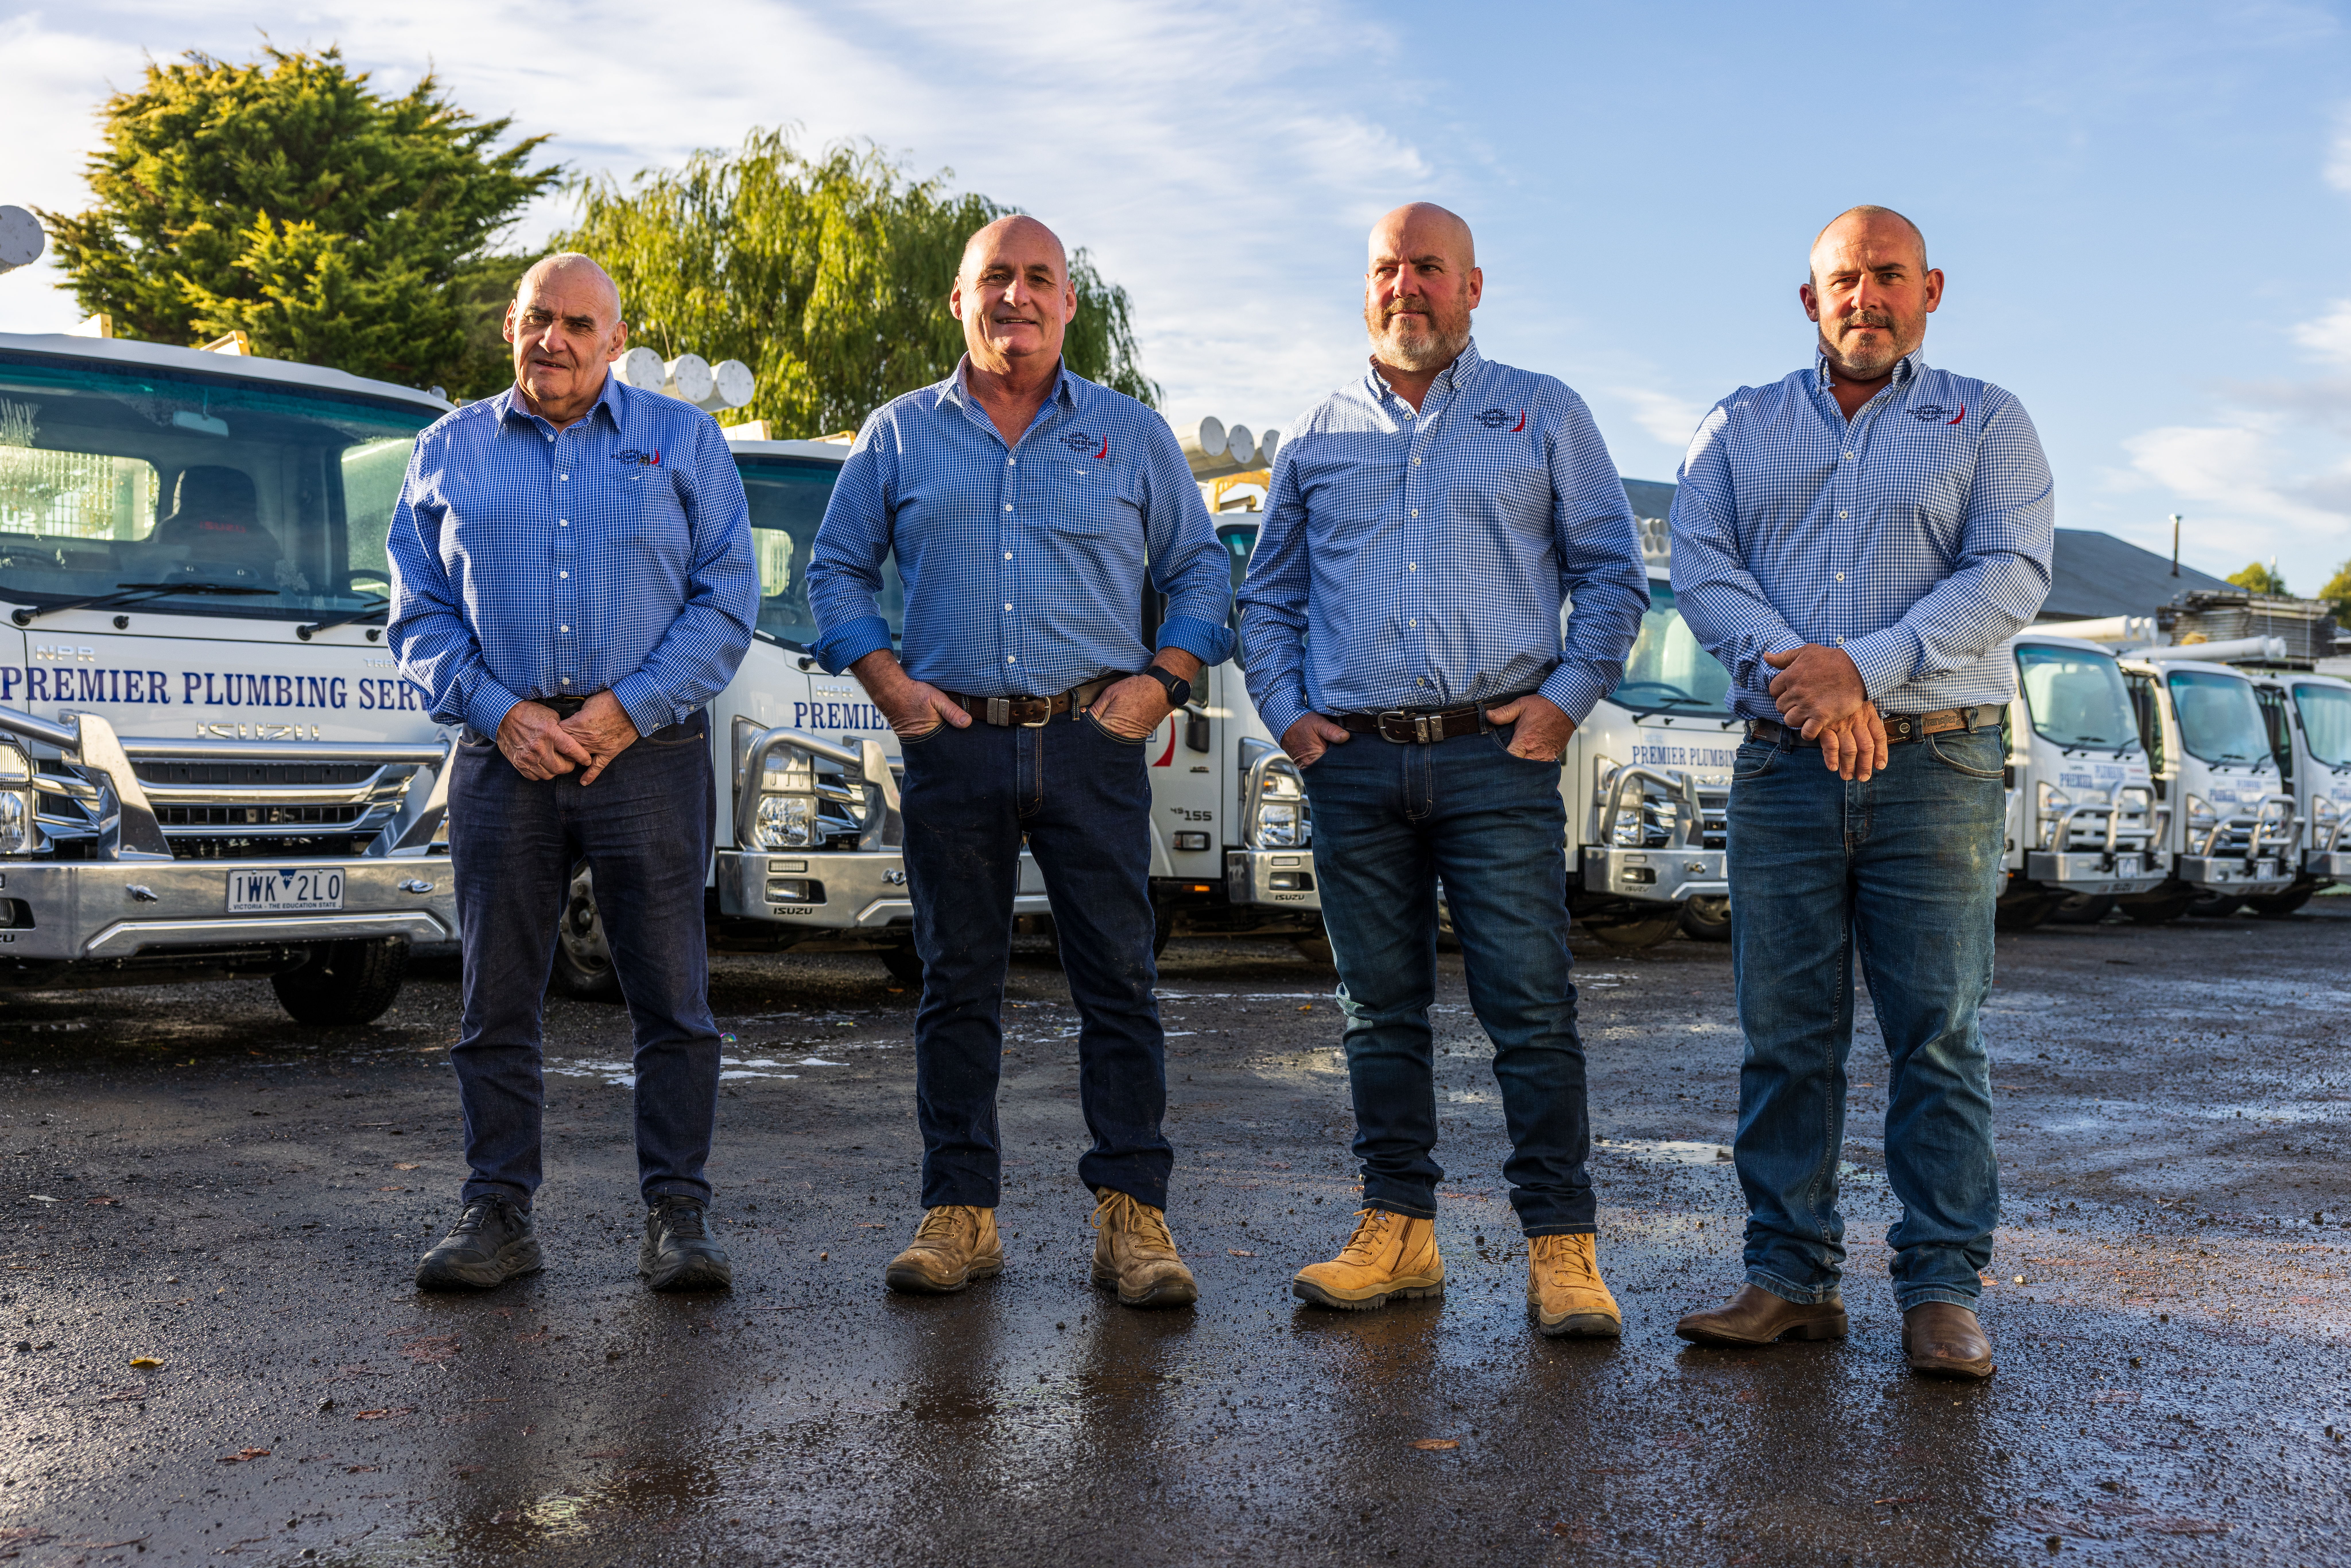 From left to right: Premier Plumbing Service Directors; Jim Donald, Grant Donald, Michael Donald, and Tim Donald.